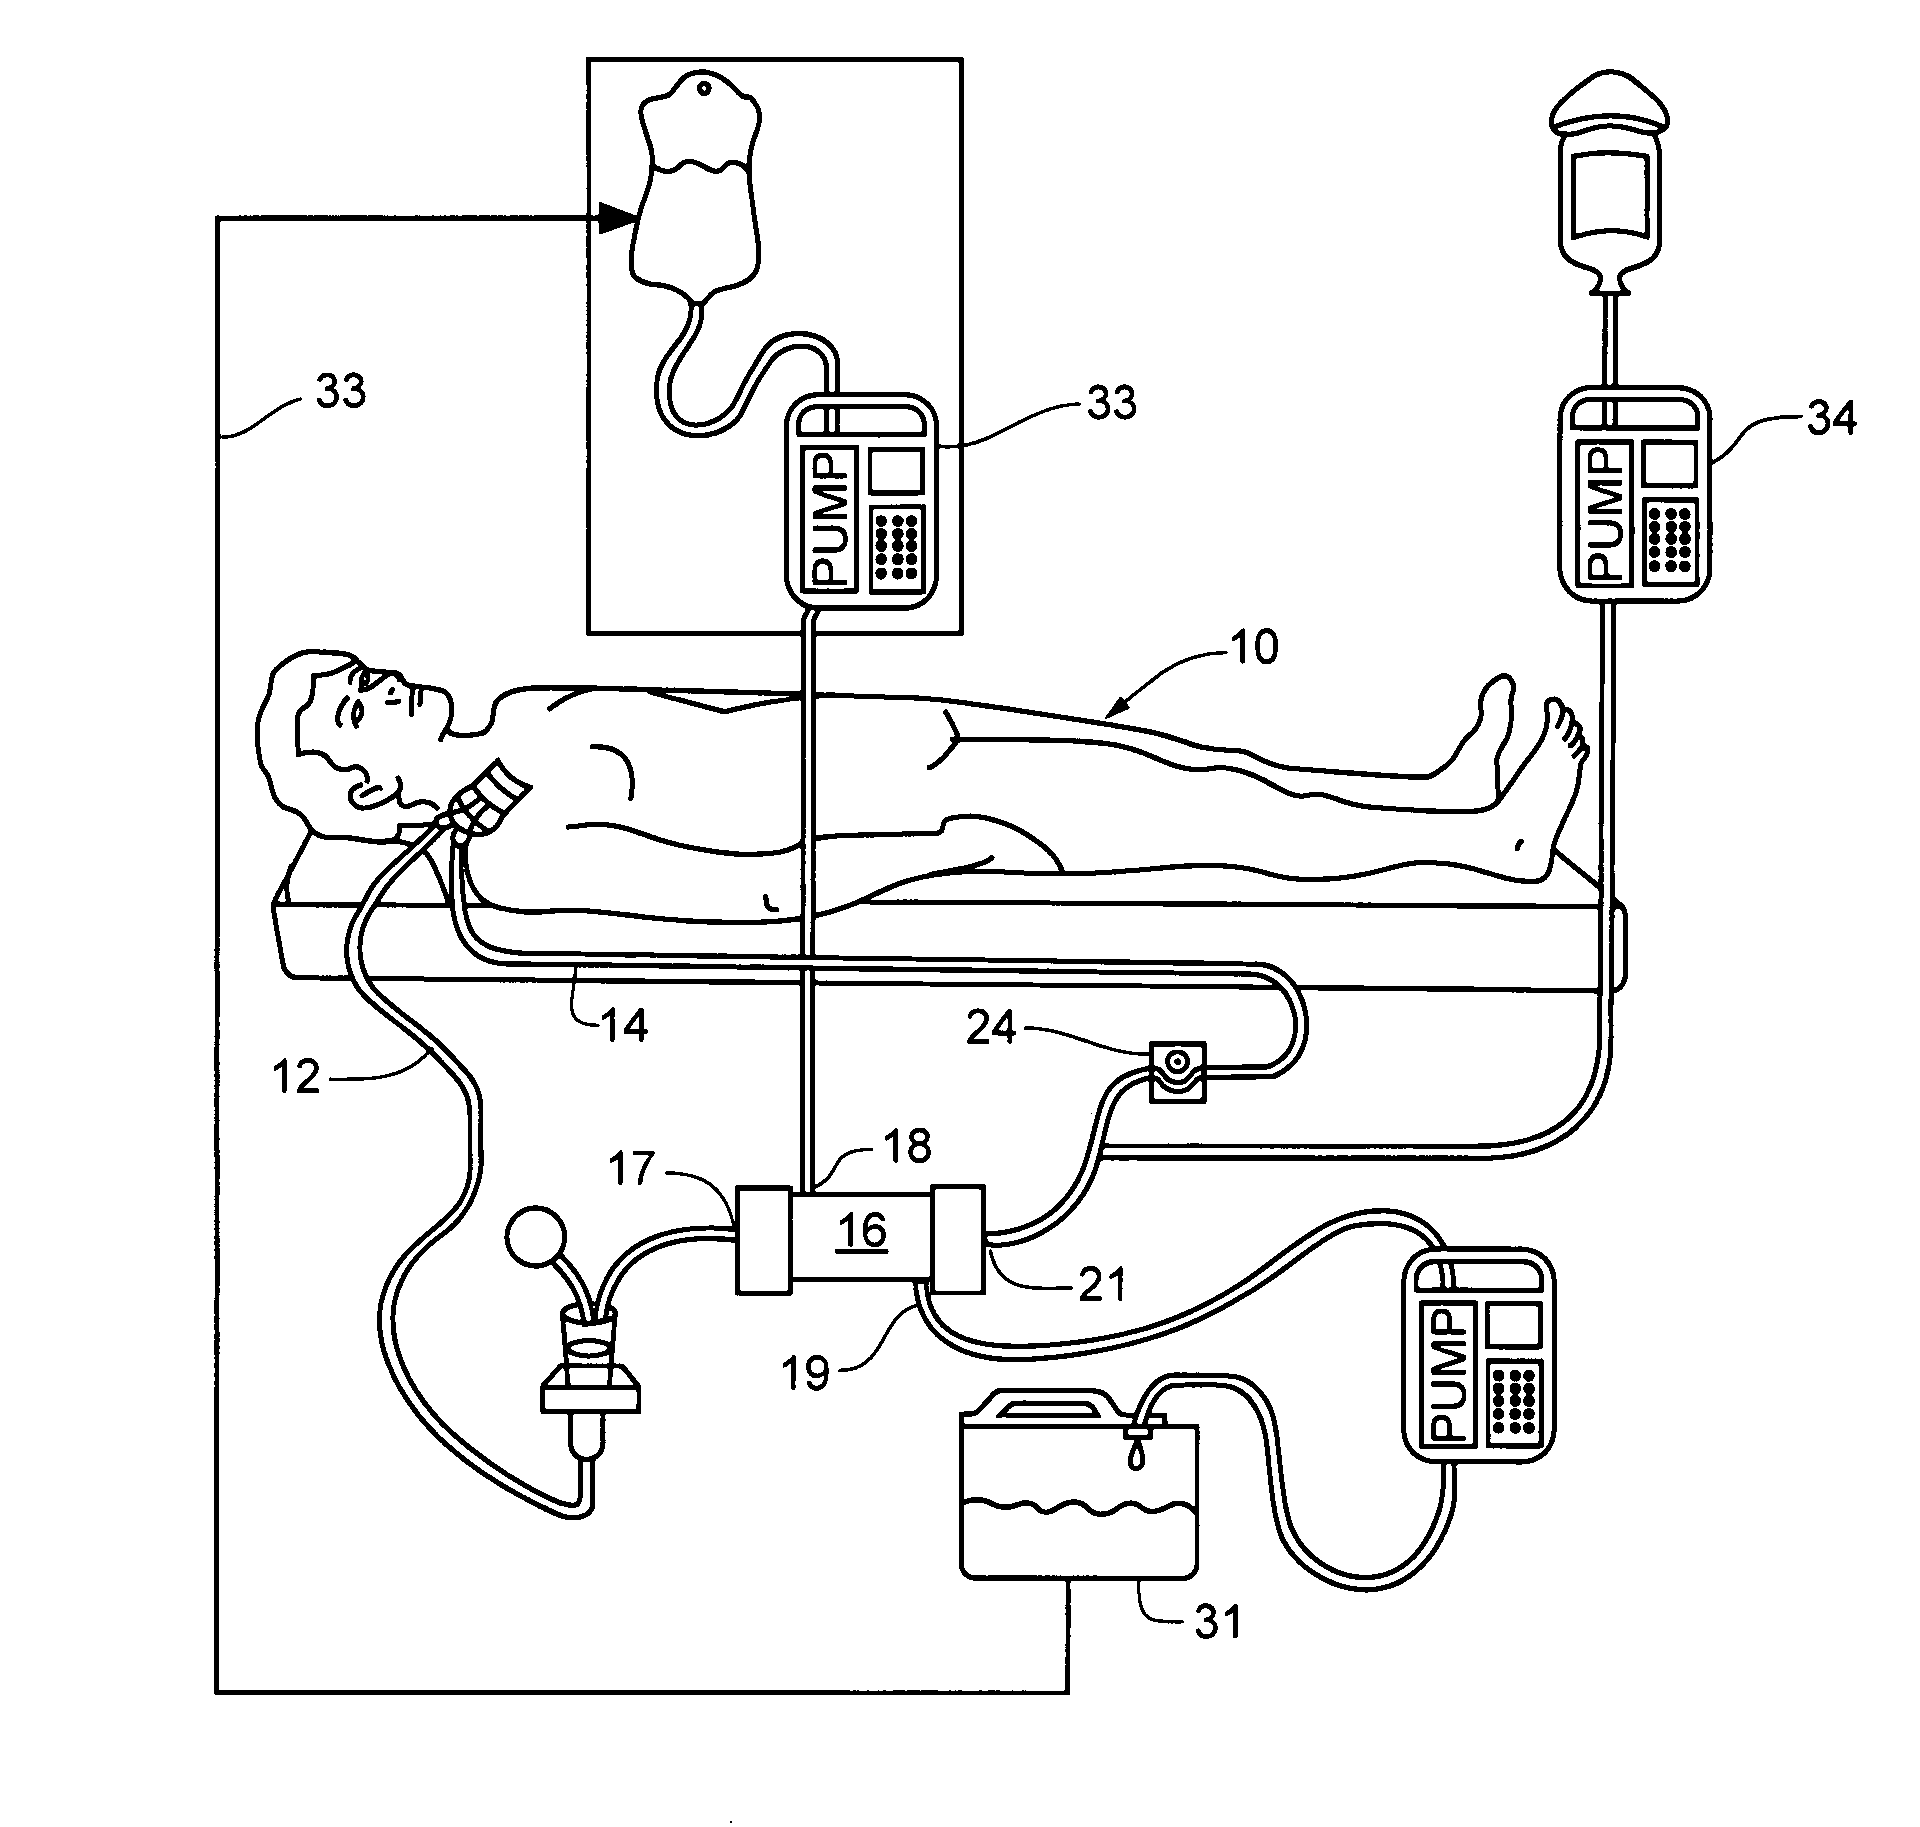 System device and method for oxygenation